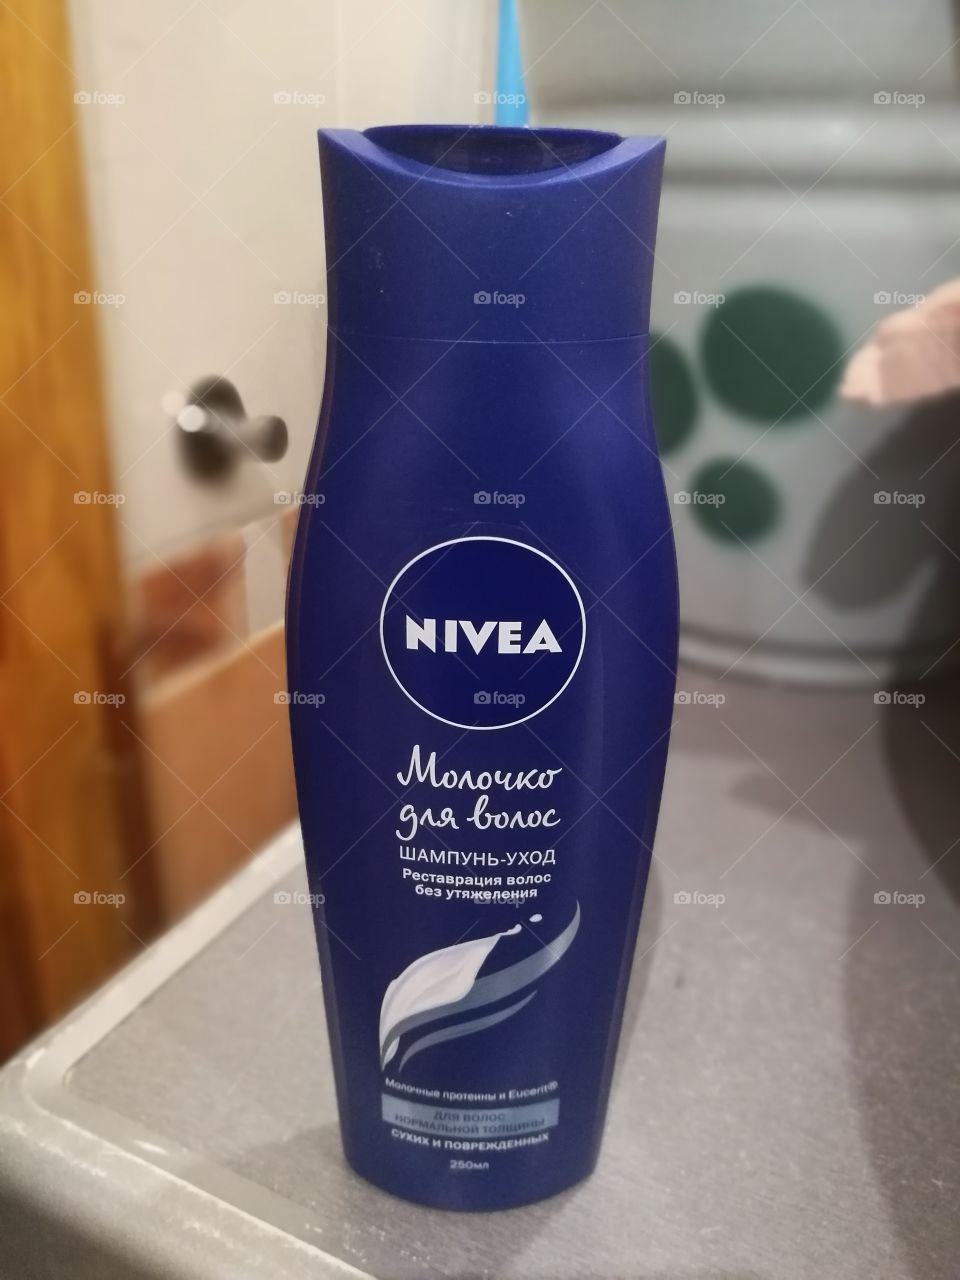 Try nivea shampoo today and the result will speak for it self